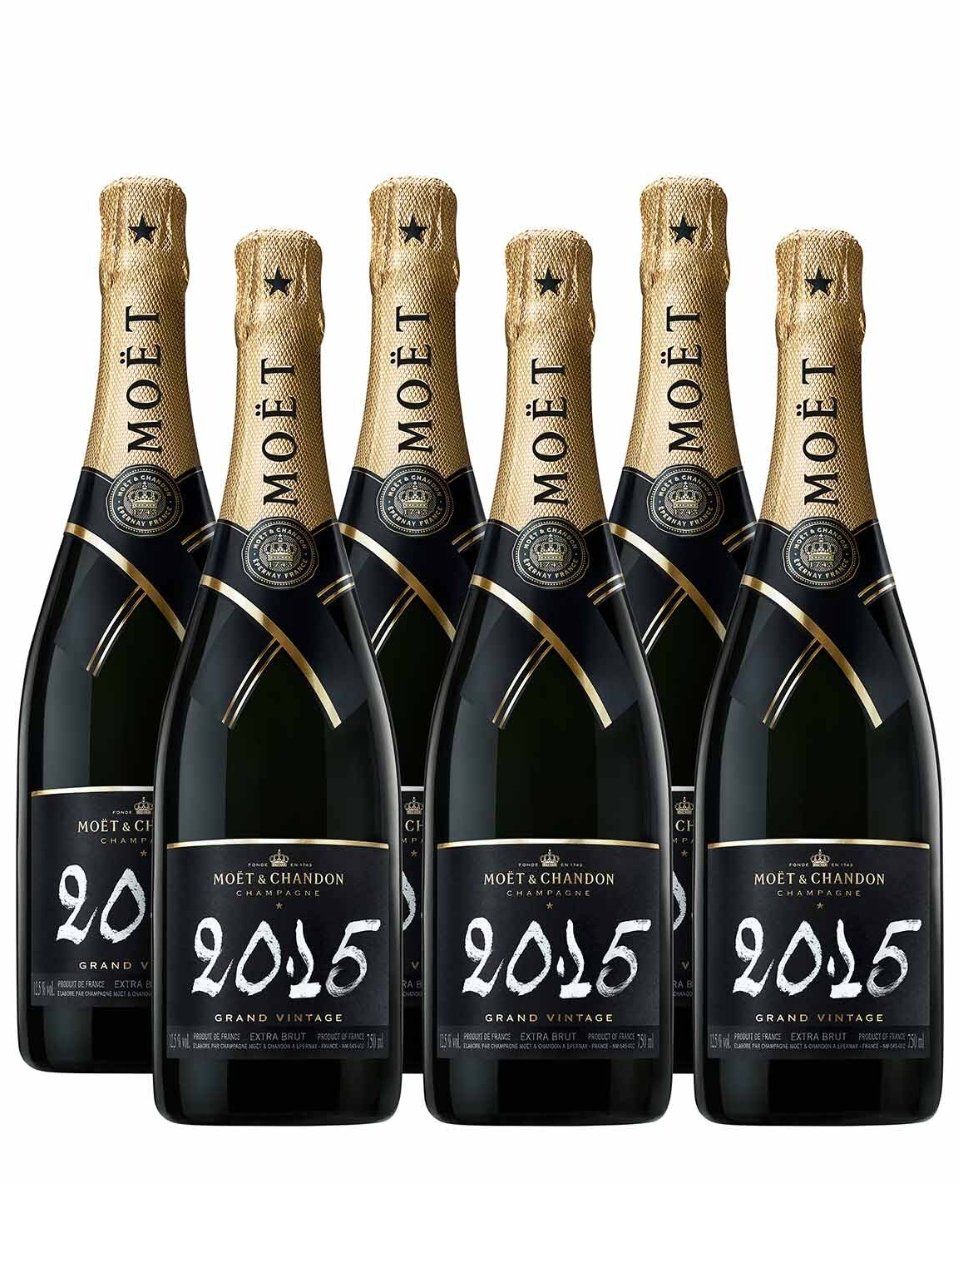 Moët & Chandon 2015 Grand Vintage Extra Brut Champagne Case | Exquisite Wine & Alcohol Gift Delivery Toronto Canada | Vyno